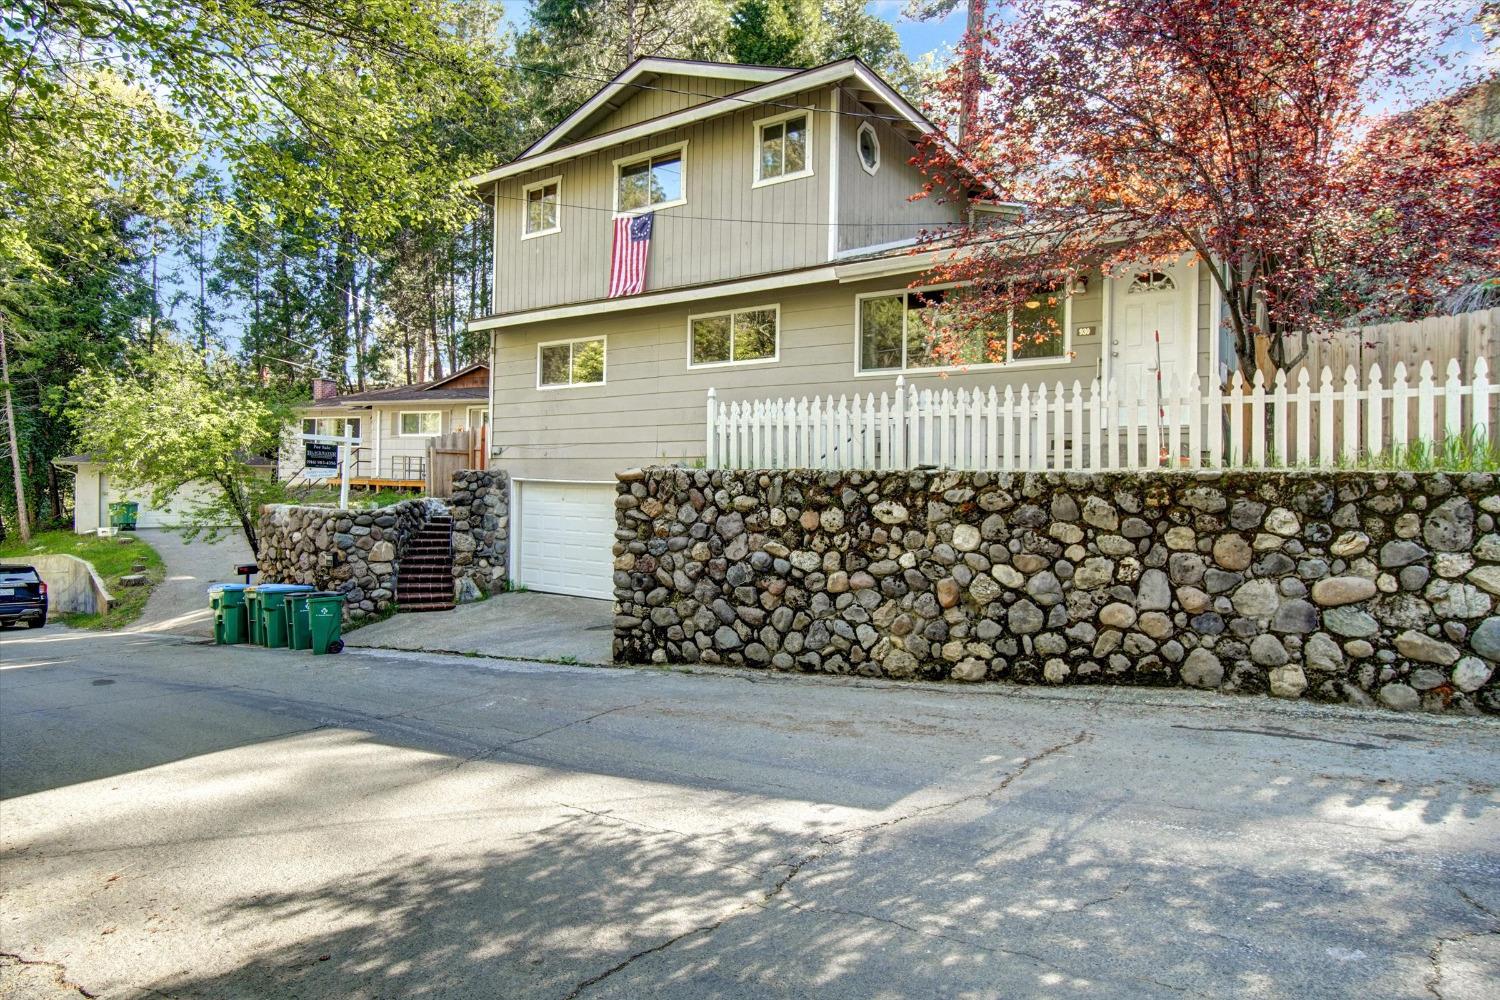 Photo of 930 Darlington Ave in Placerville, CA